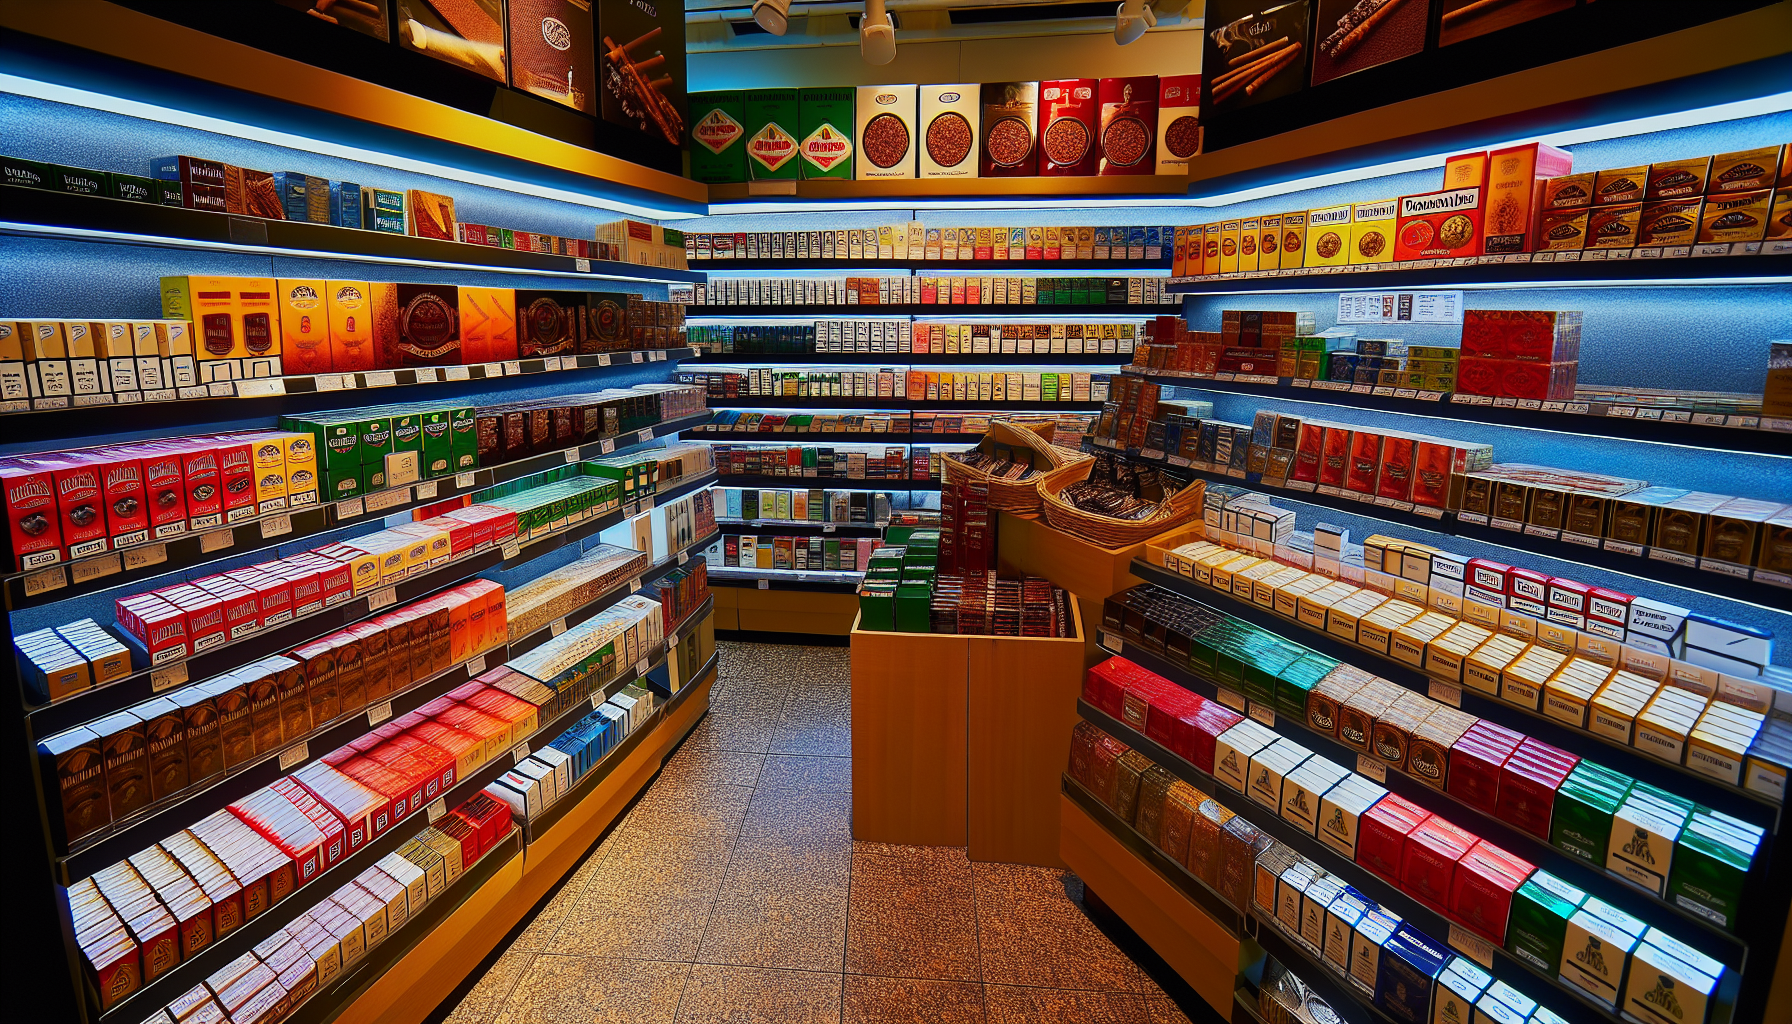 A colorful display of various tobacco products in a store